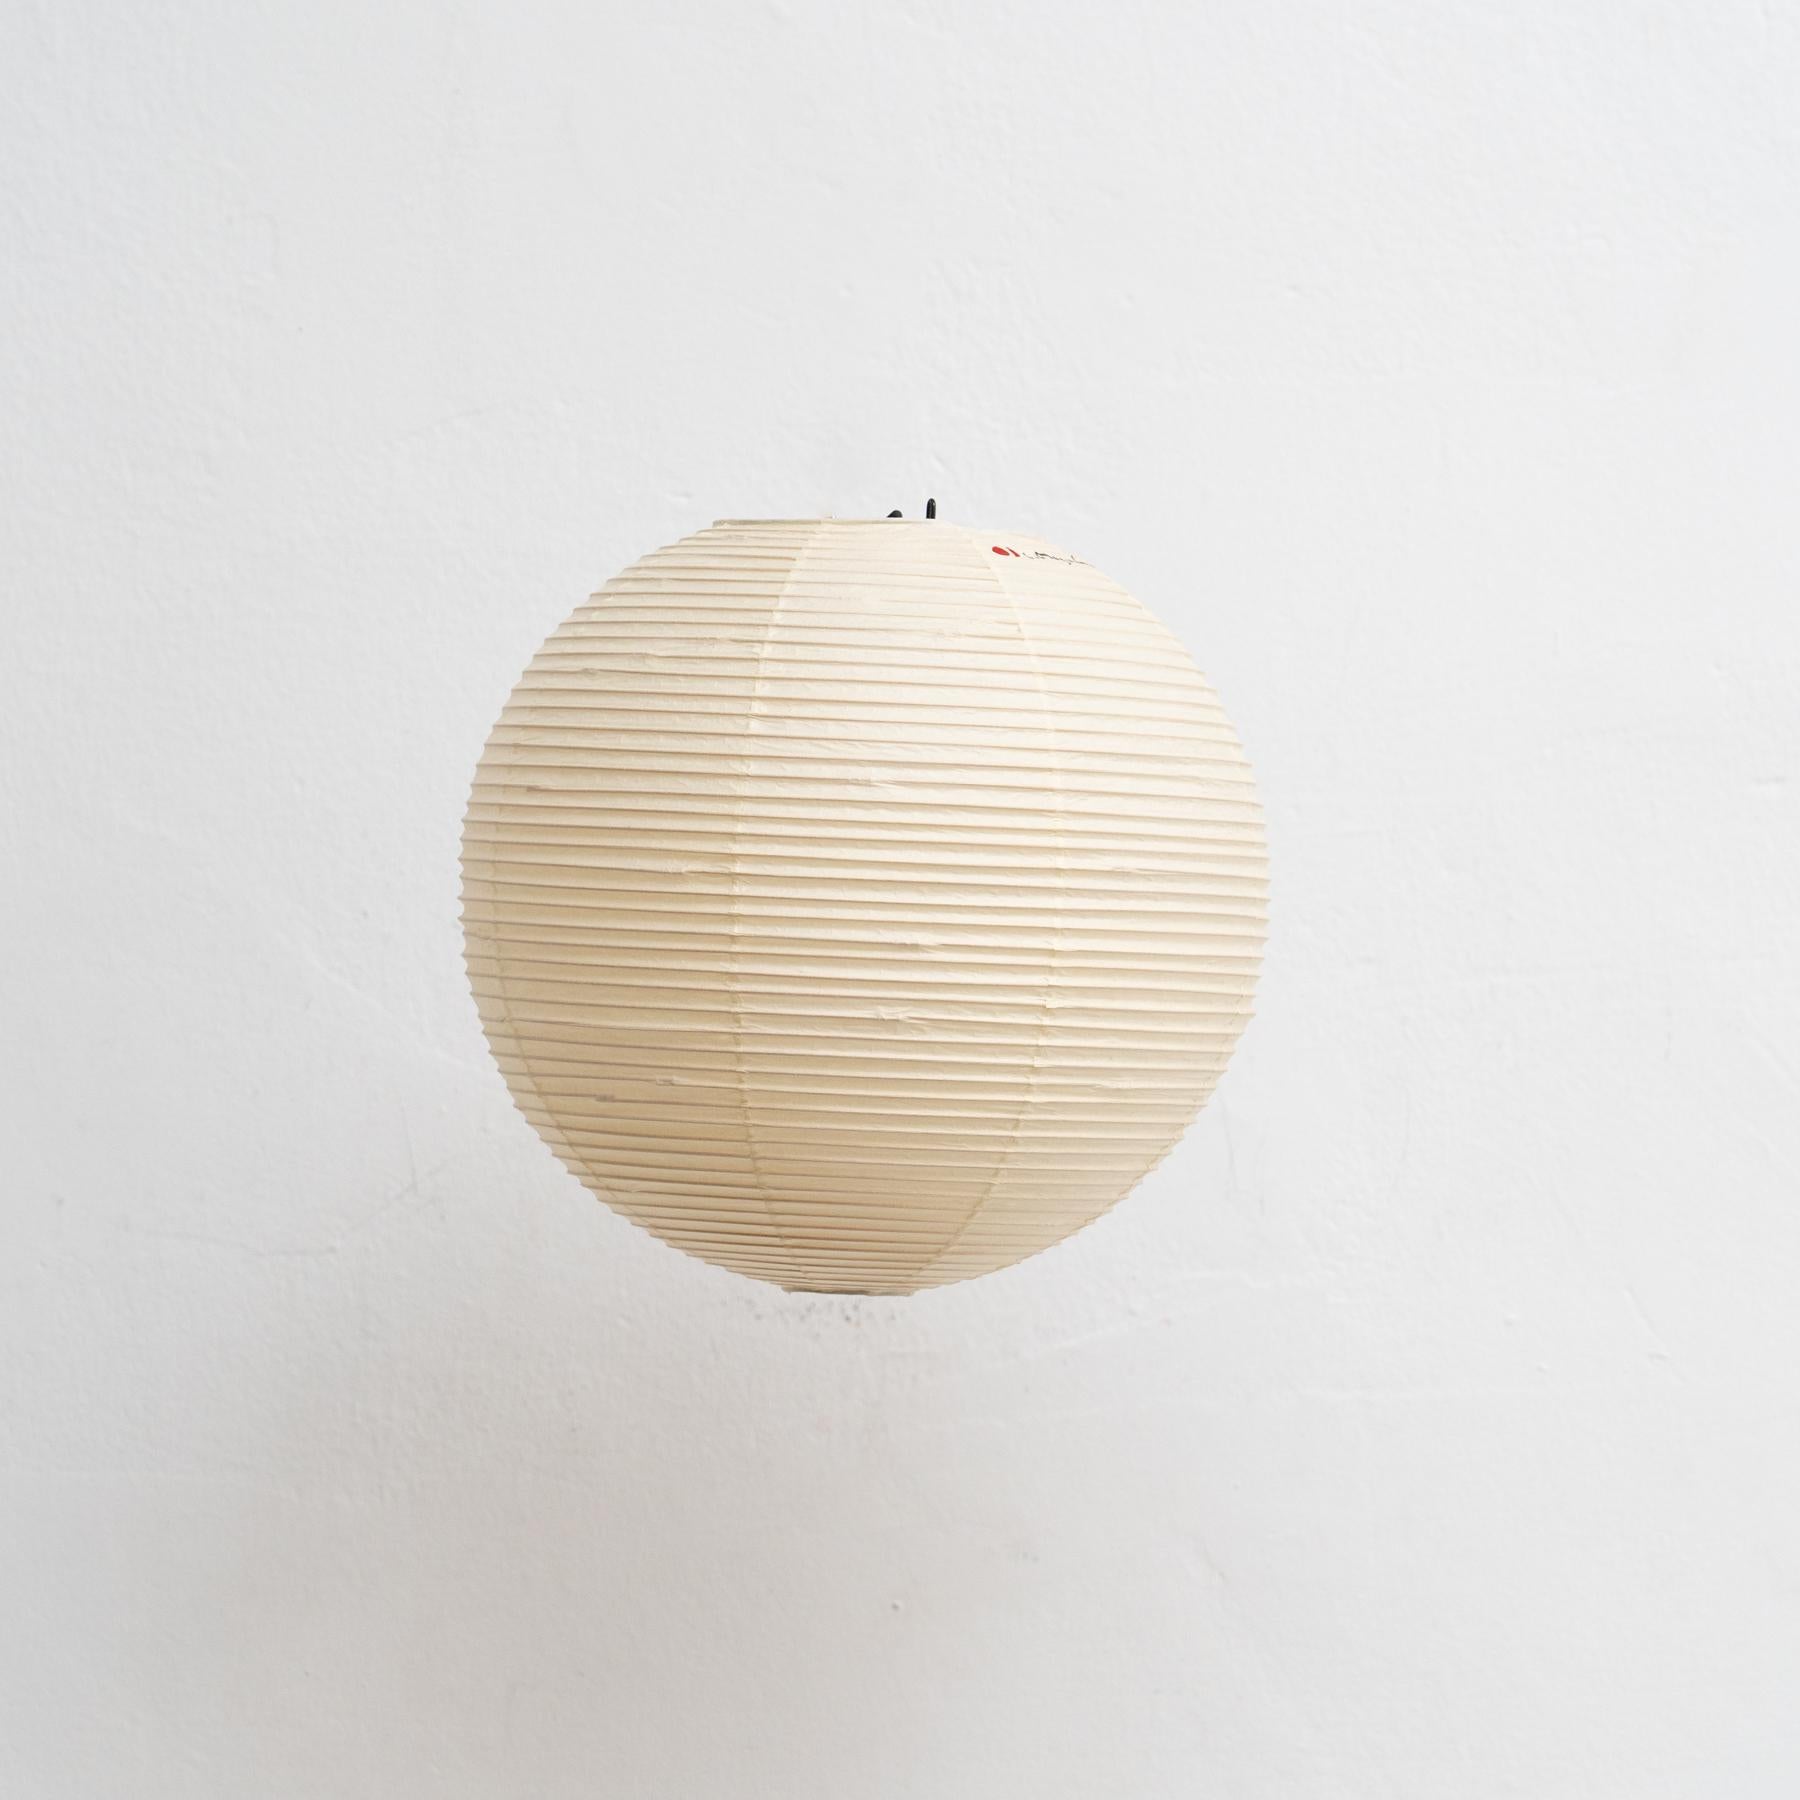 Pendant lamp model 30A designed by Isamu Noguchi.

Manufactured by Ozeki & Company Ltd. (Japan.)

Bamboo ribbing structure covered by washi paper manufactured according to the traditional procedures.

In original condition, with minor wear